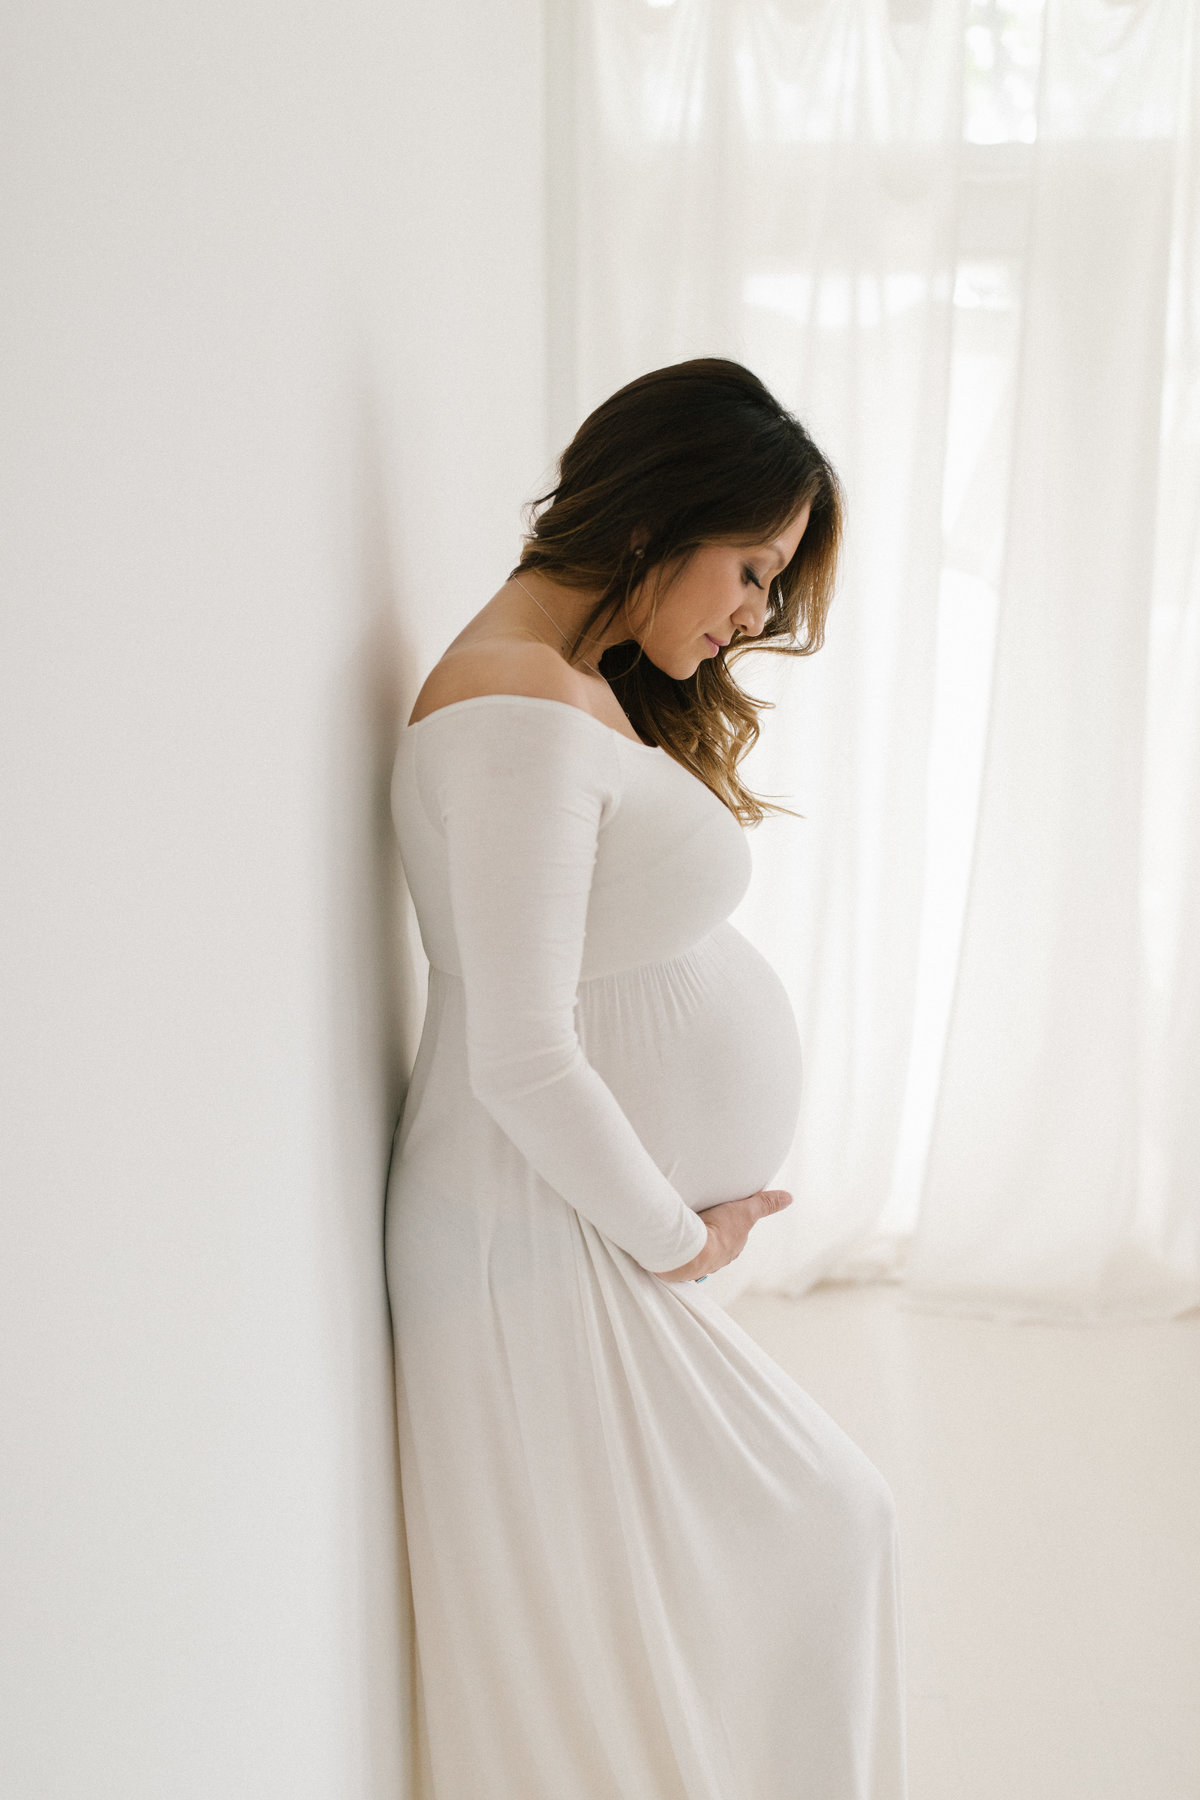 Chicago maternity photographer Elle Baker Photography photographs a woman in a long white dress in her natural light studio